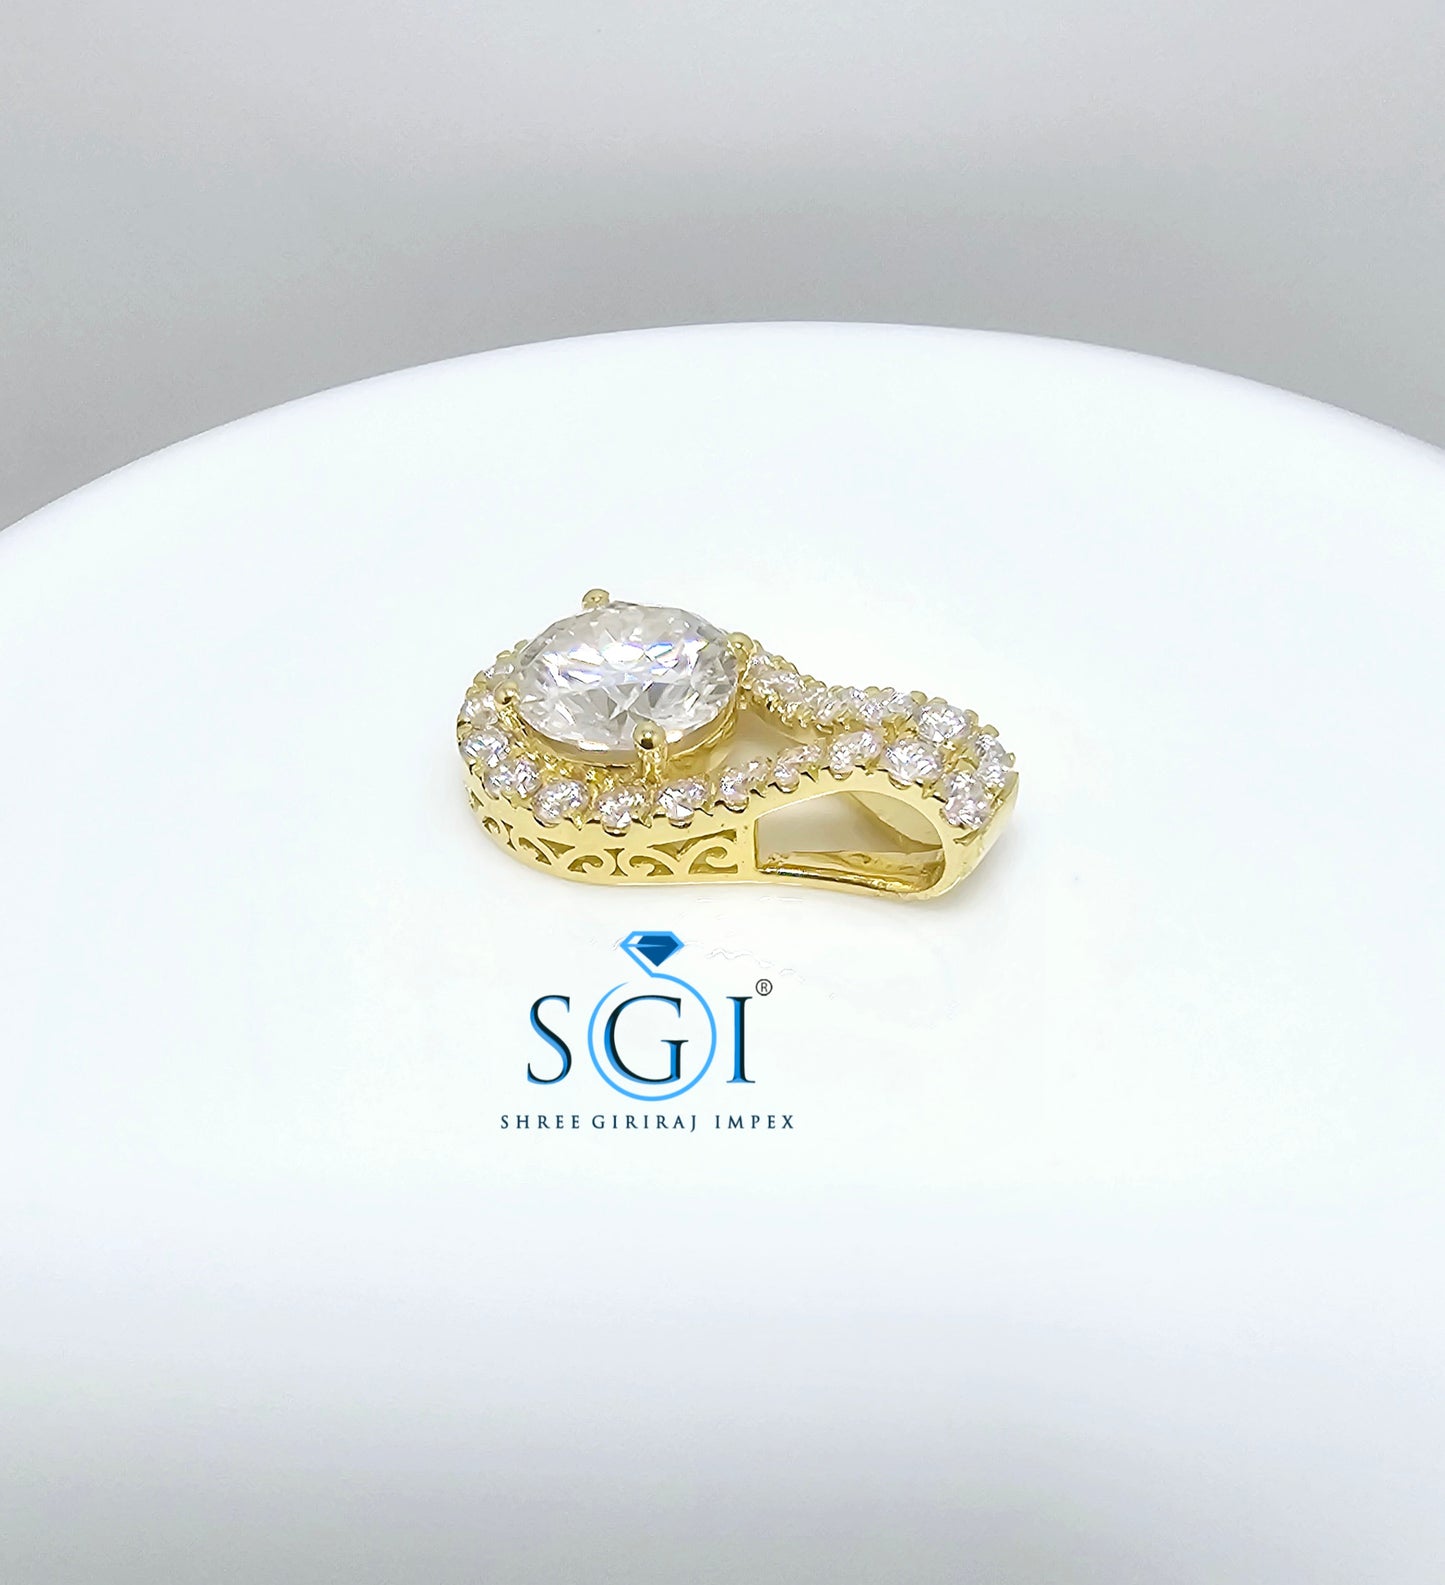 4ctw Moissanite Diamond Pendant With Yellow Gold Engagement Wedding and Anniversary